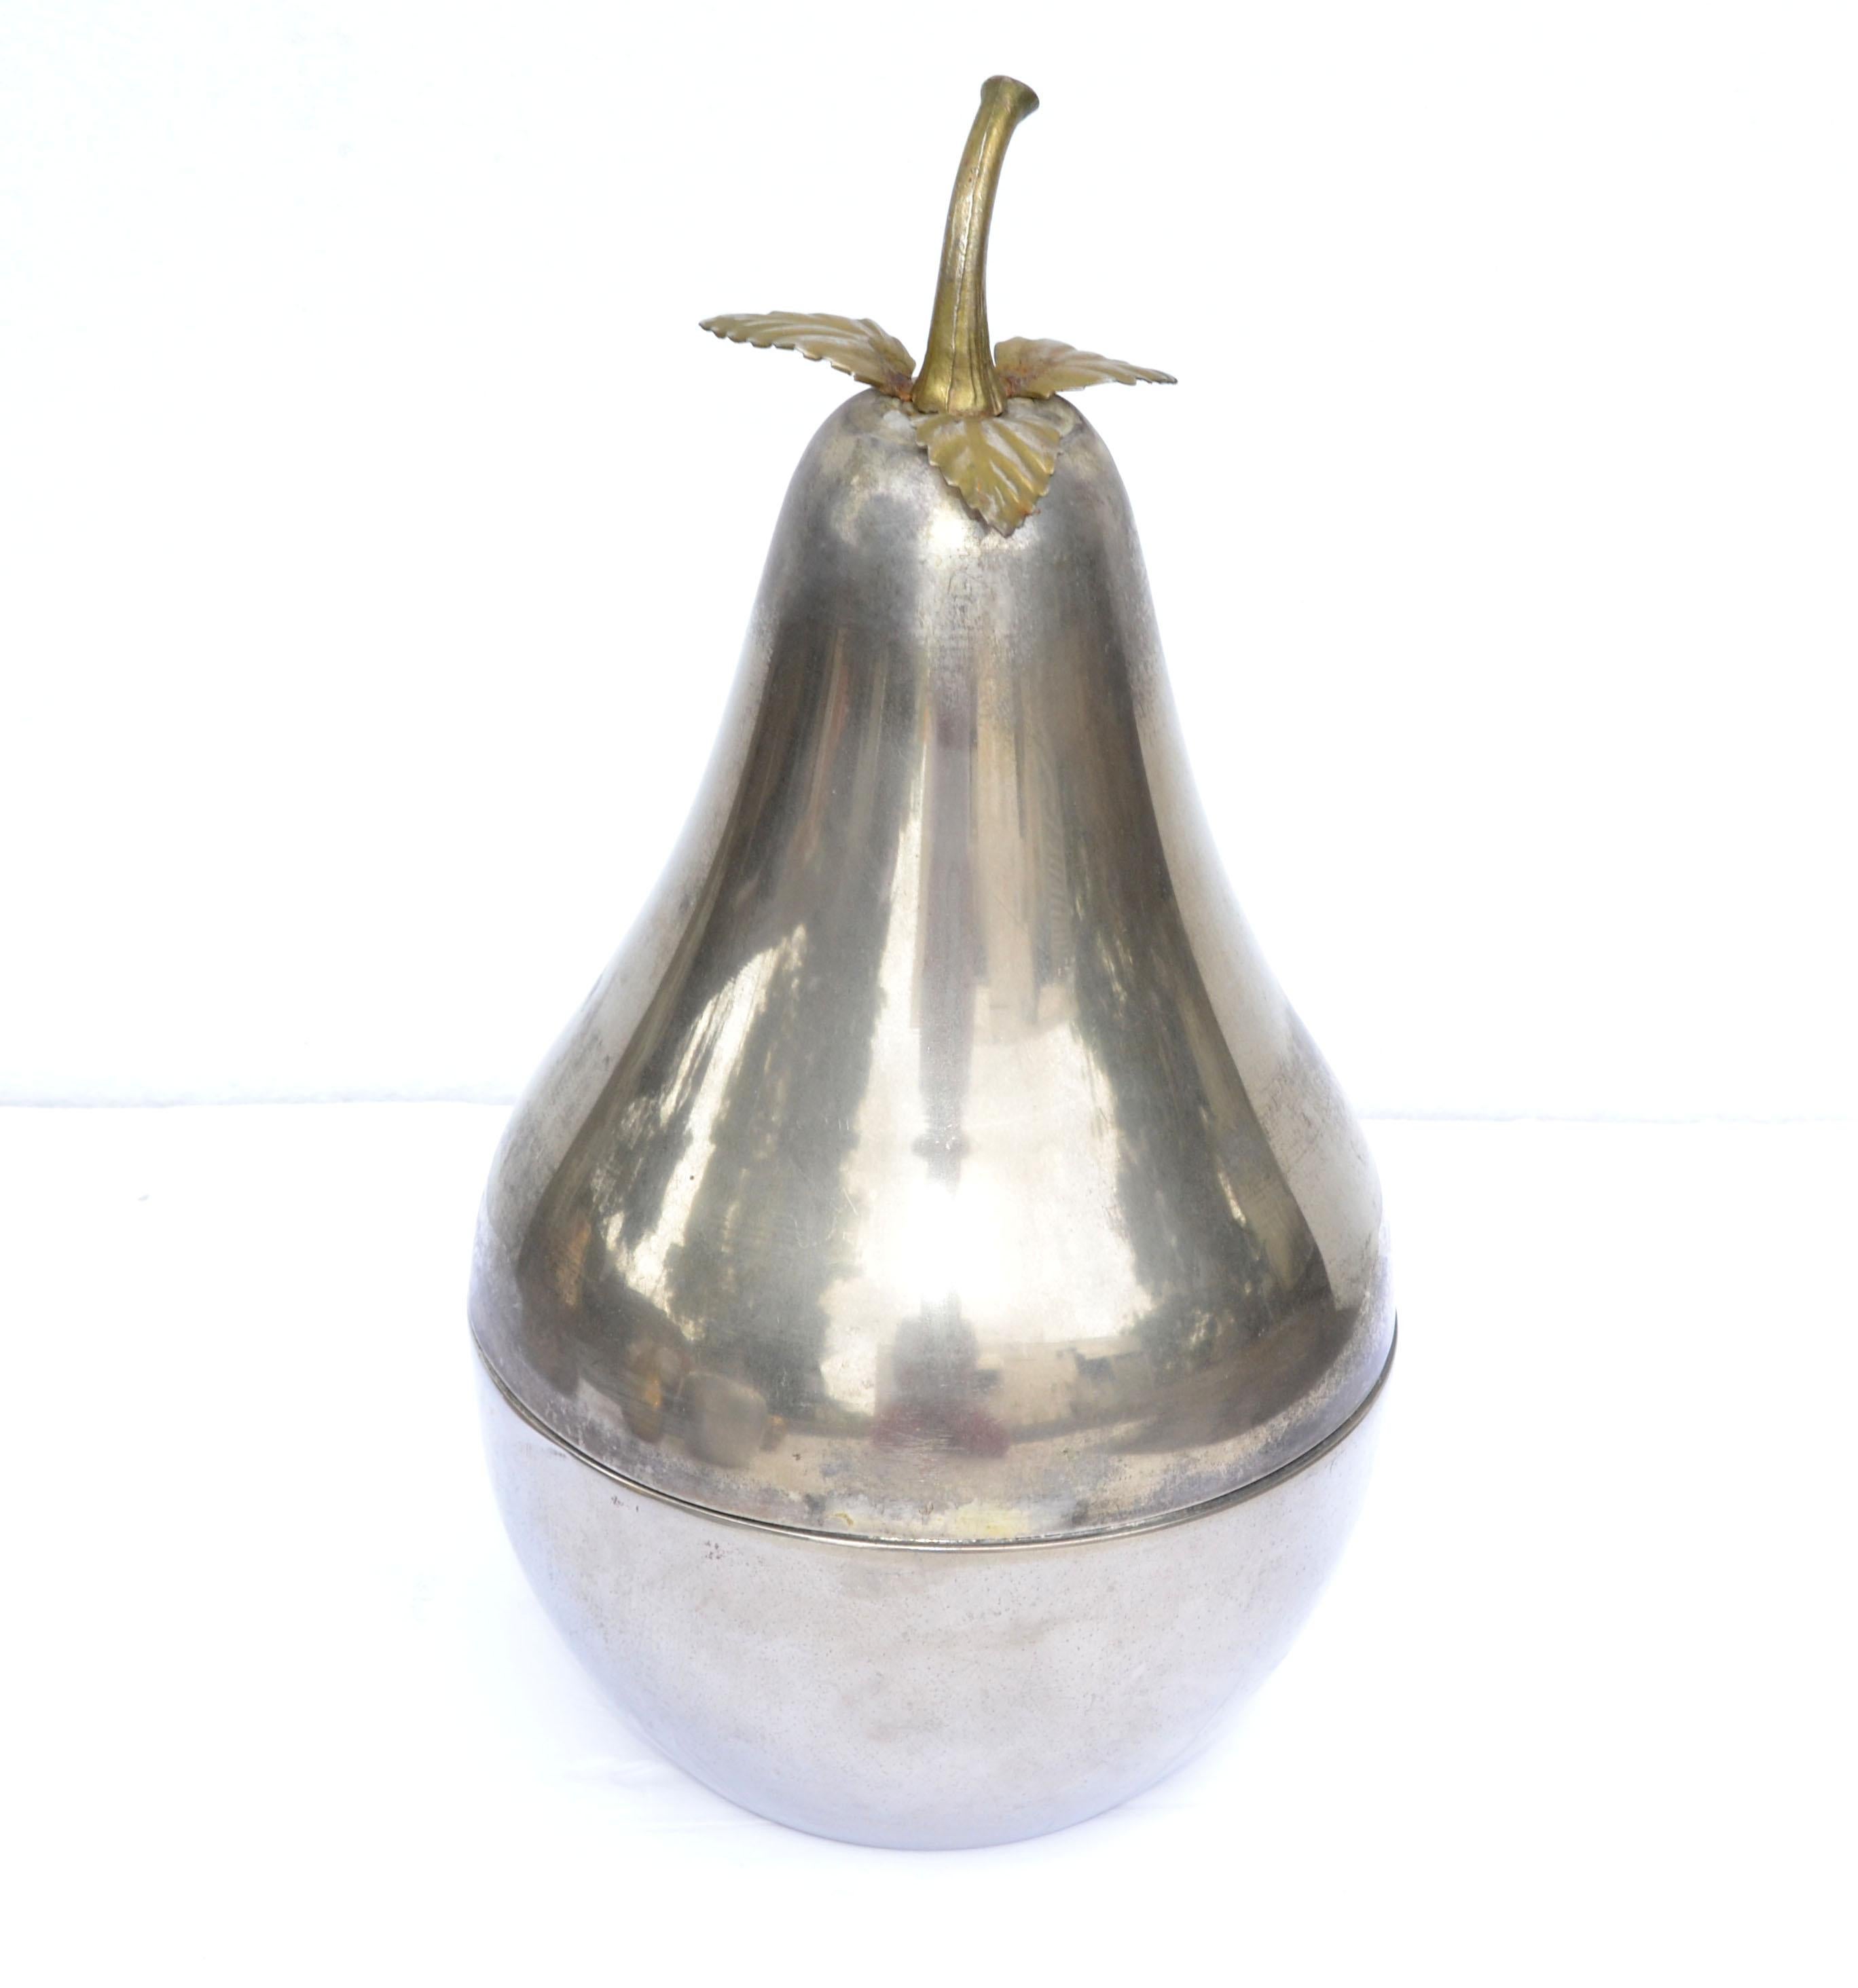 Superb ice bucket in the form of pear the silver plated over Nickel body with removable lid complete with naturalistic leaves and stalk.
All original condition with patina to the Metal. 
Please take a look at our large Collection of Mid-Century